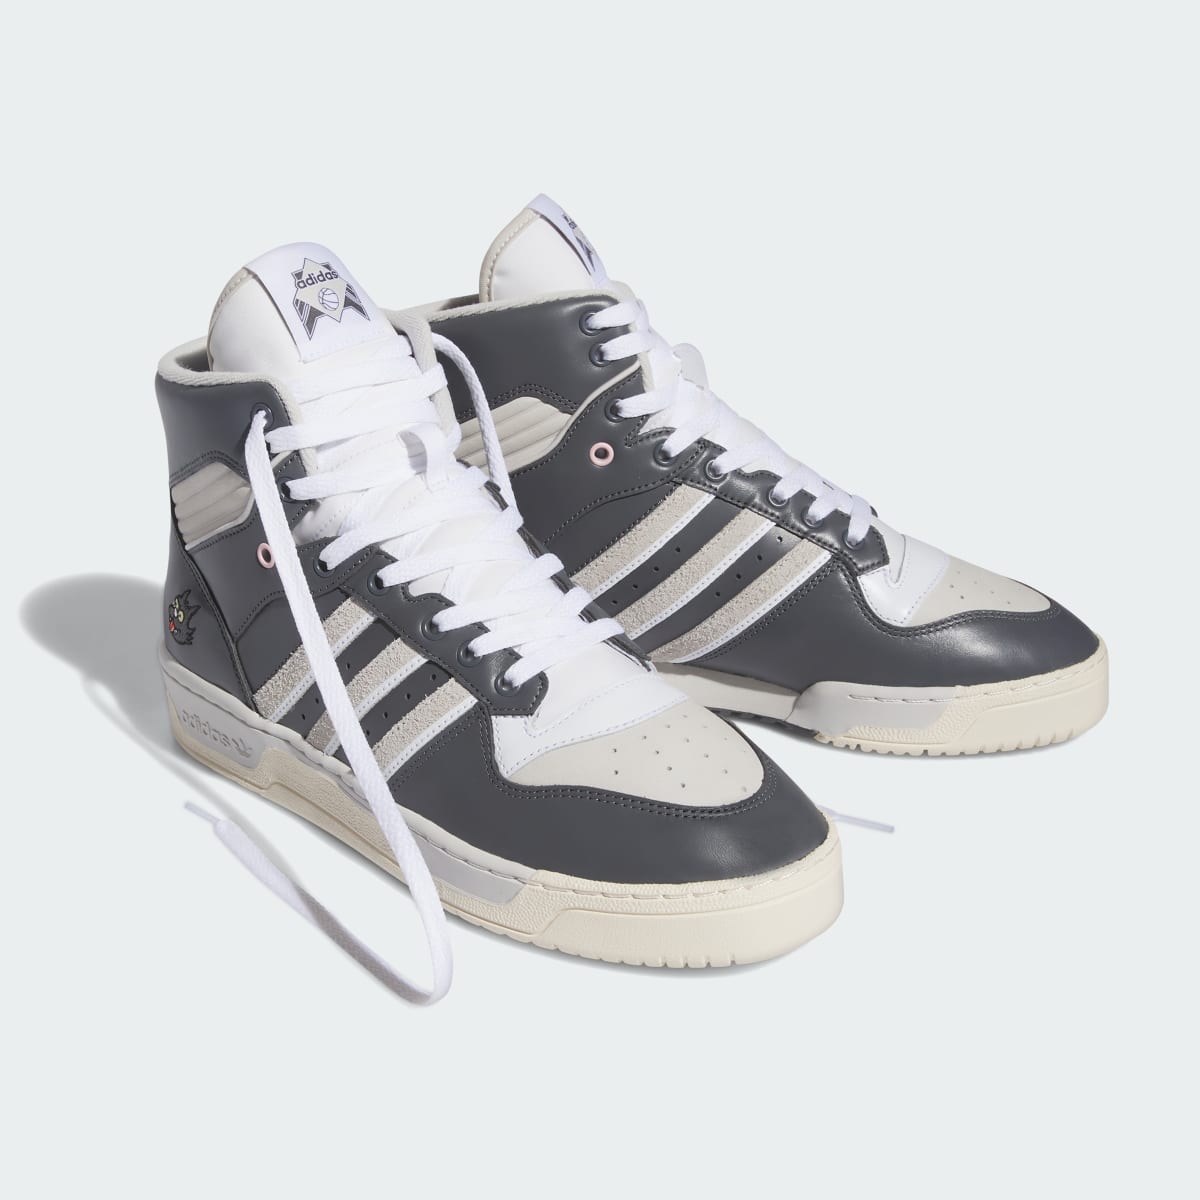 Adidas Rivalry High Scratchy Schuh. 7